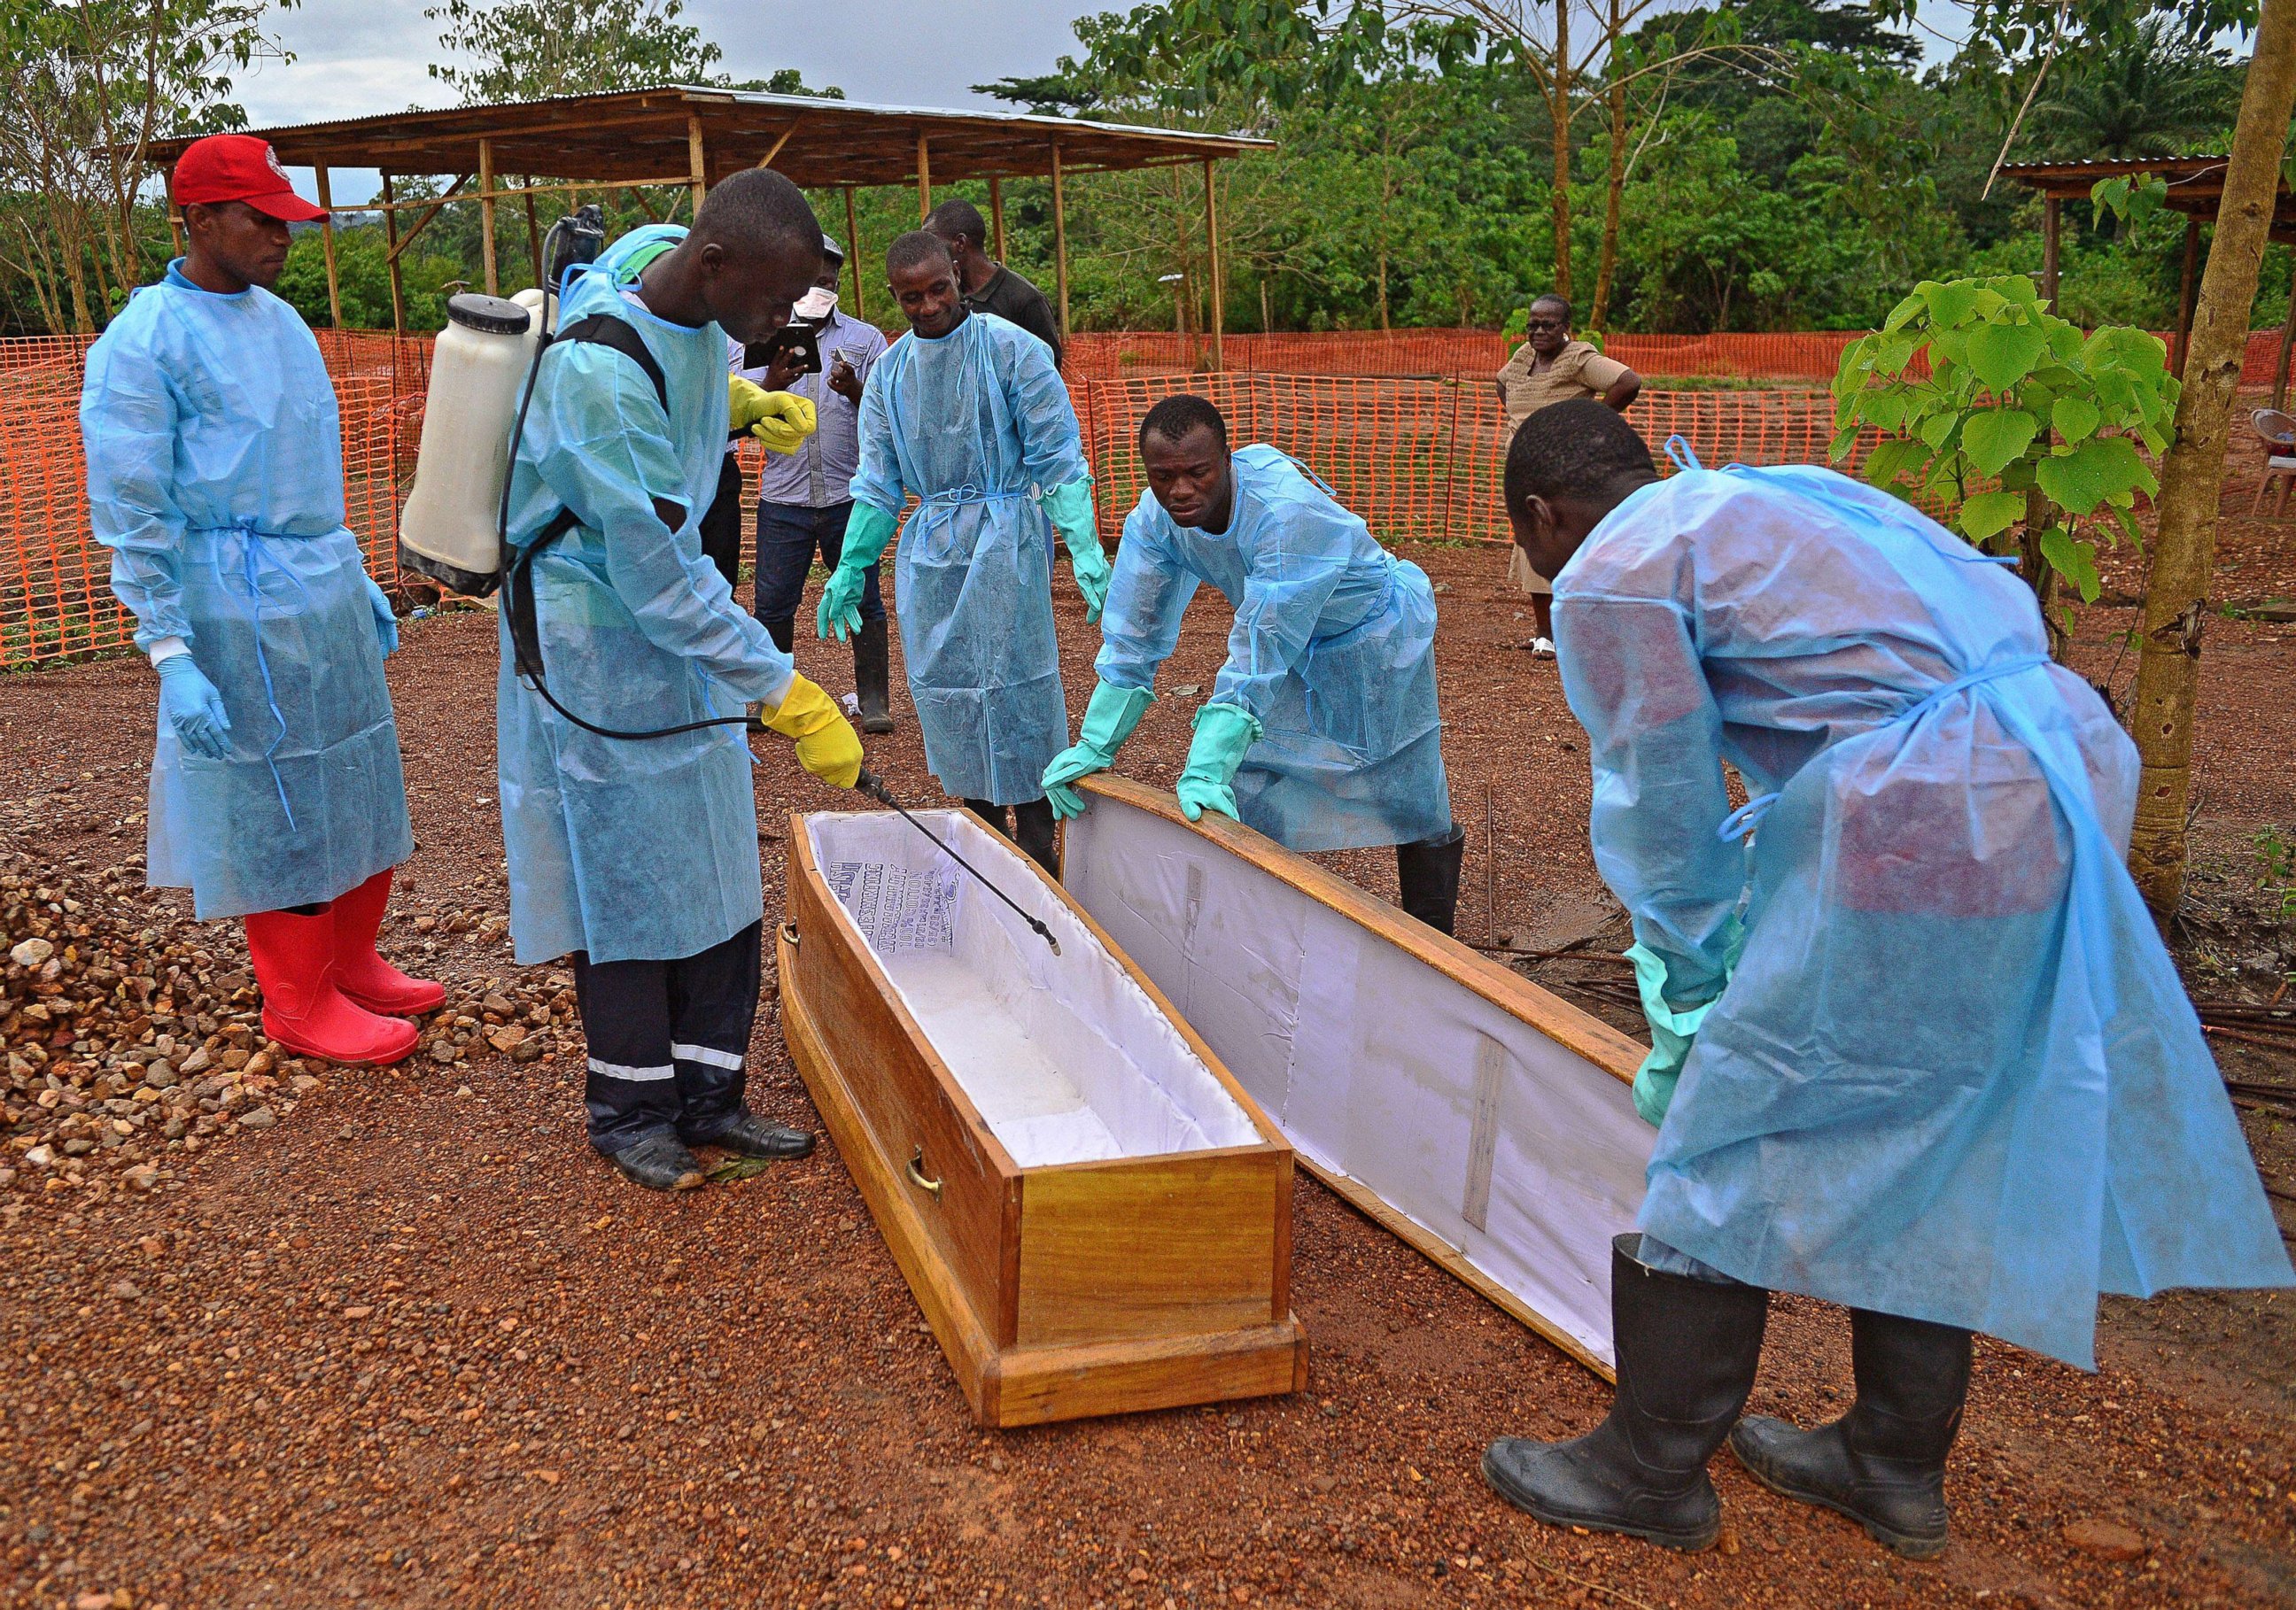 PHOTO: Sierra Leonese government burial team members are pictured wearing protective clothing while disinfecting a coffin at the Medecins Sans Frontieres facility in Kailahun, Sierra Leone on Aug. 14, 2014. 